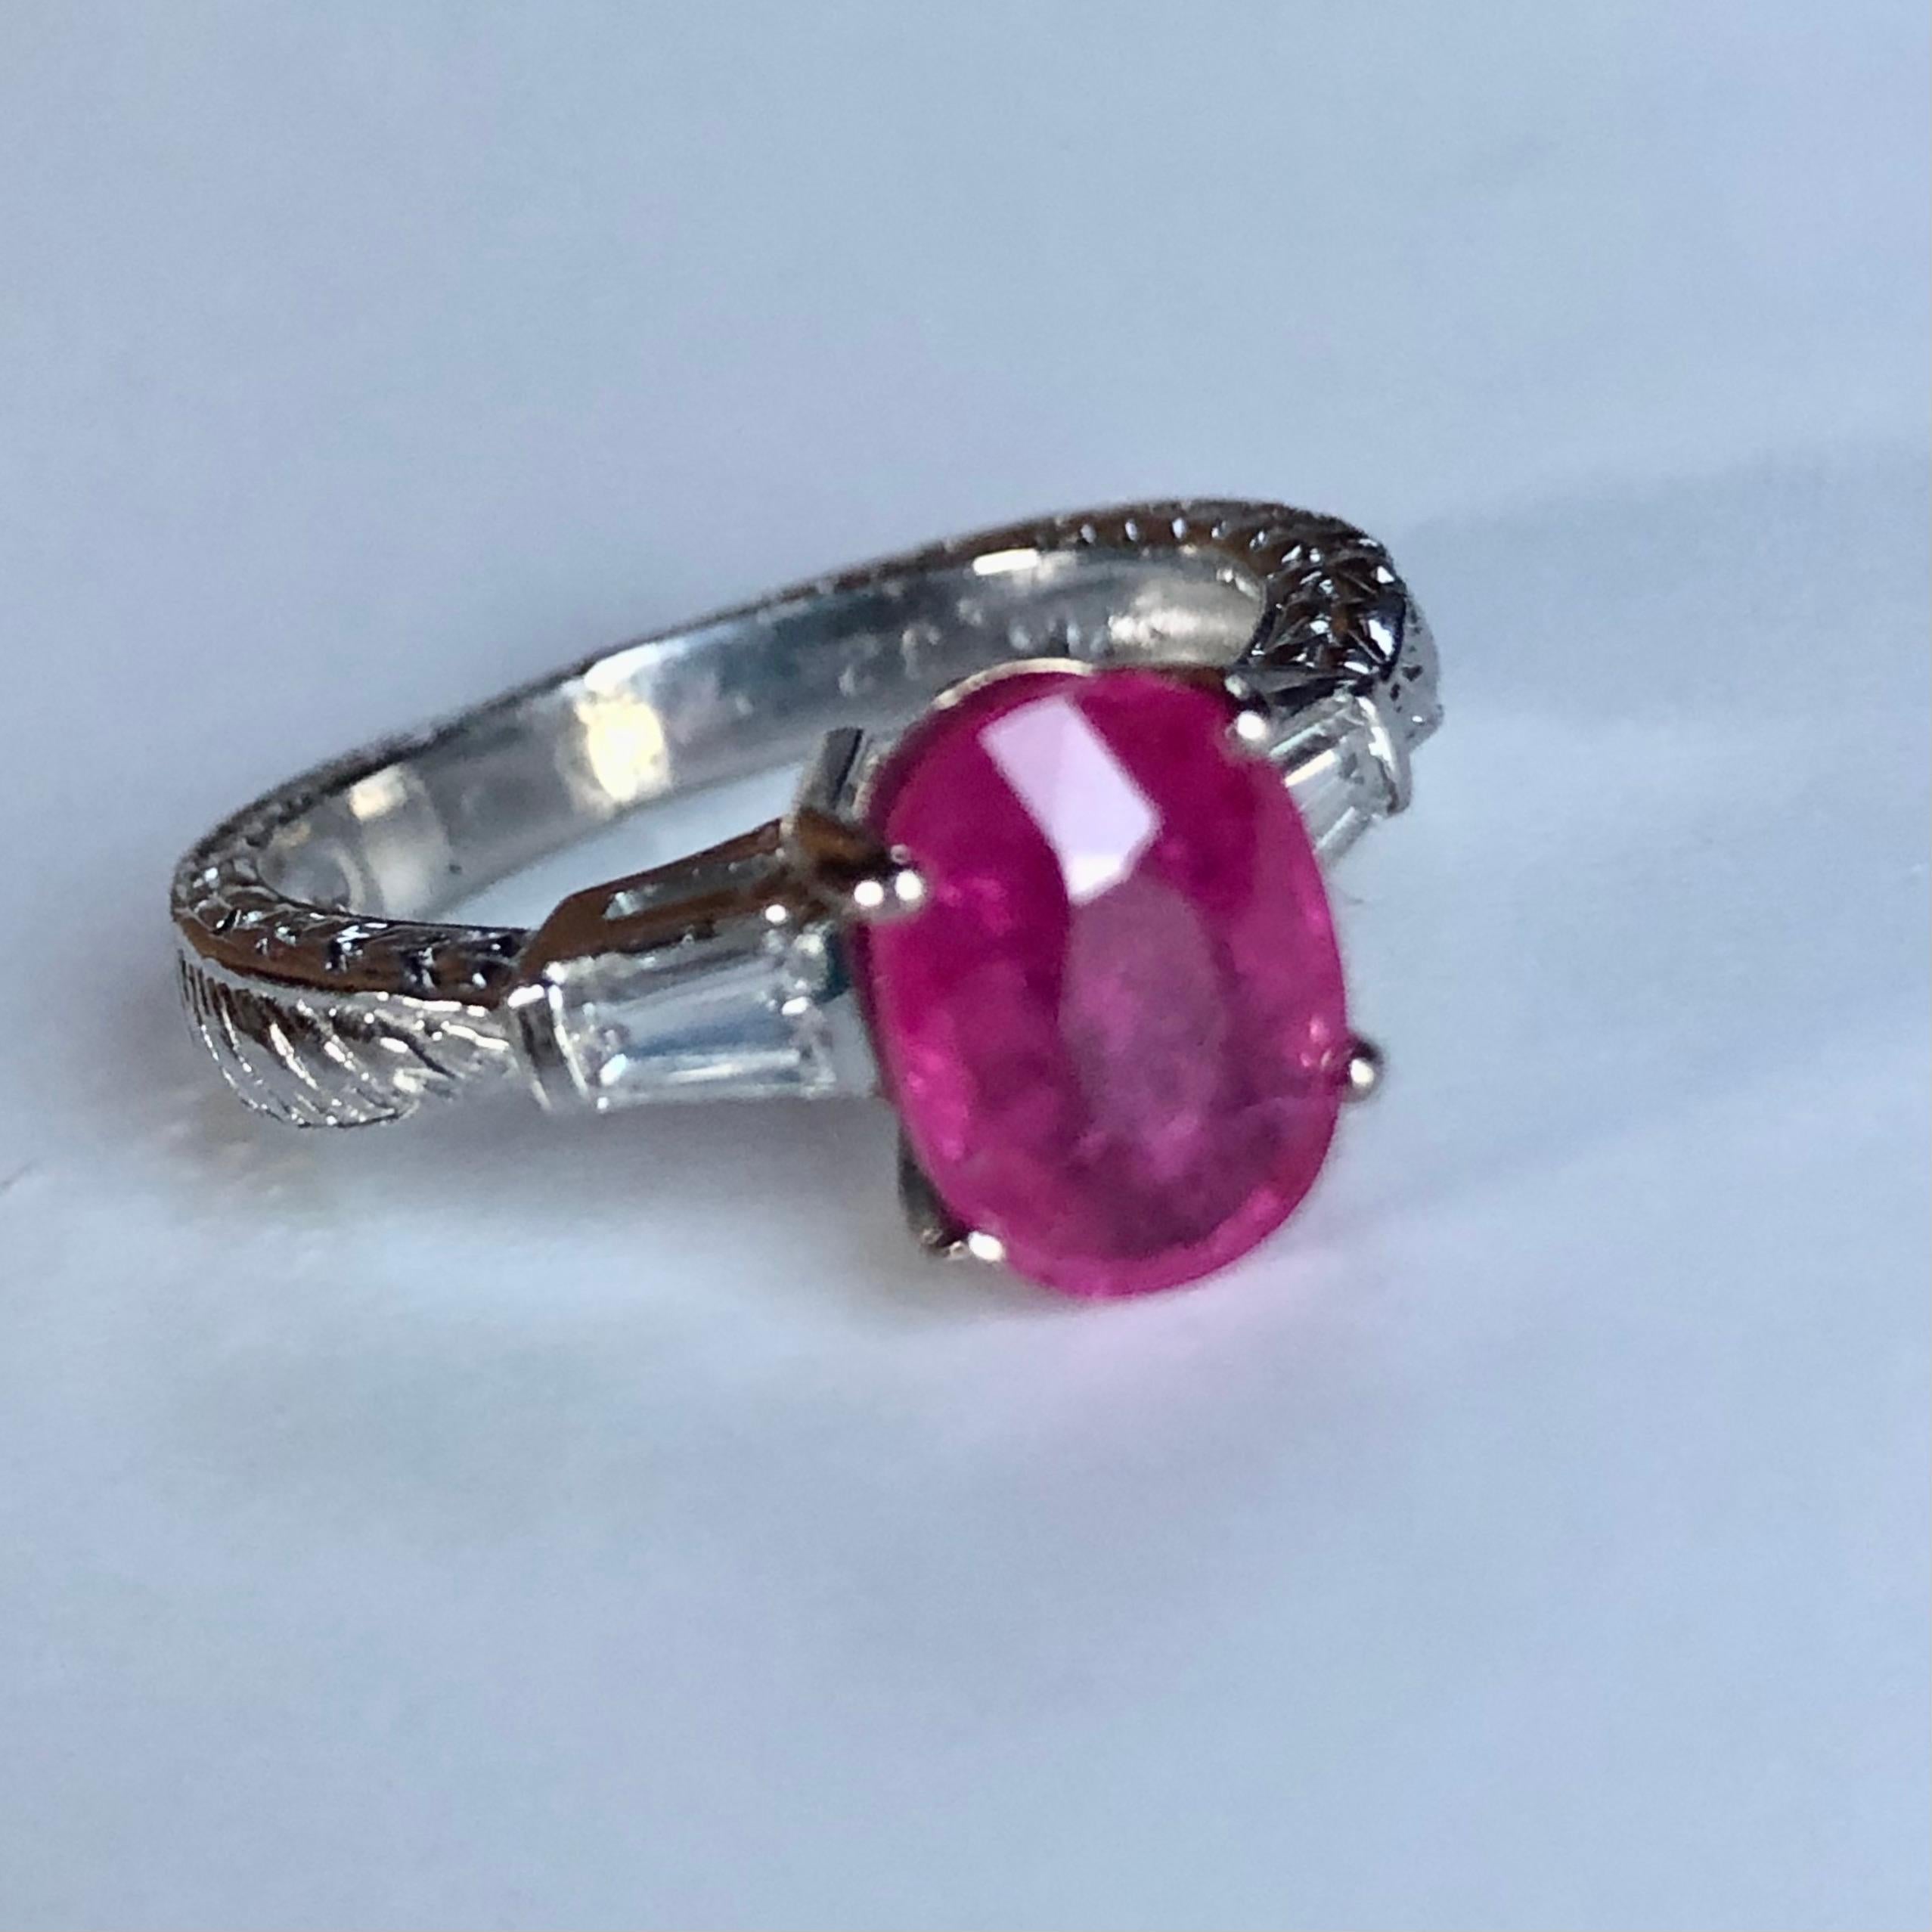 Vintage 2.75 Carat Vintage Ruby Diamond Ring Platinum and 18K
Primary Stone: Natural Ruby(heated low temperature)
Shape or Cut: Oval Cut  
Ruby Weight: 2.43 Carats 
Color: Red Pinkish
Average Clarity: VS  
Accent Stones: Diamond 
Shape or Cut